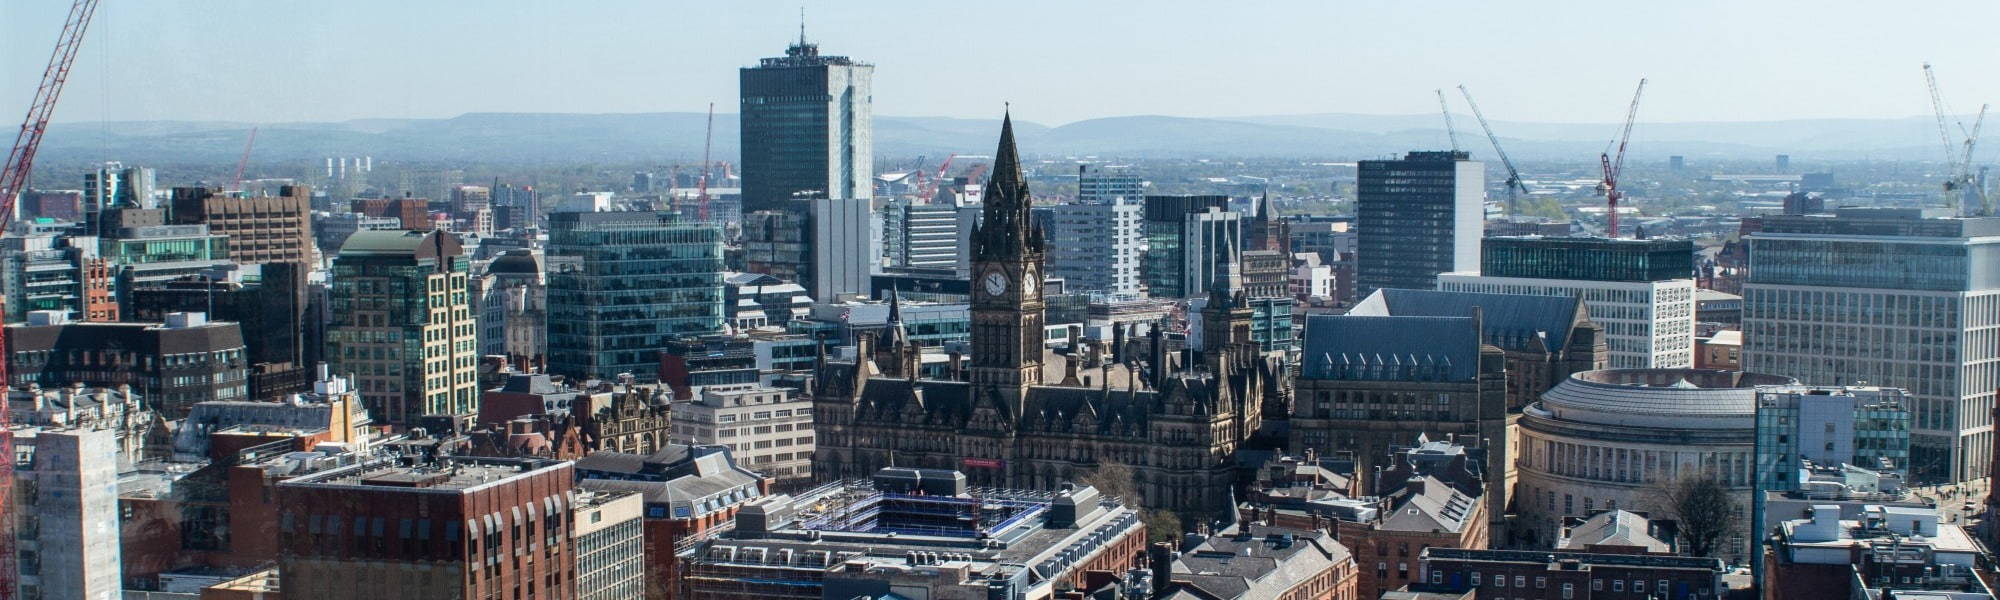 Engineering Recruitment Agency in Manchester